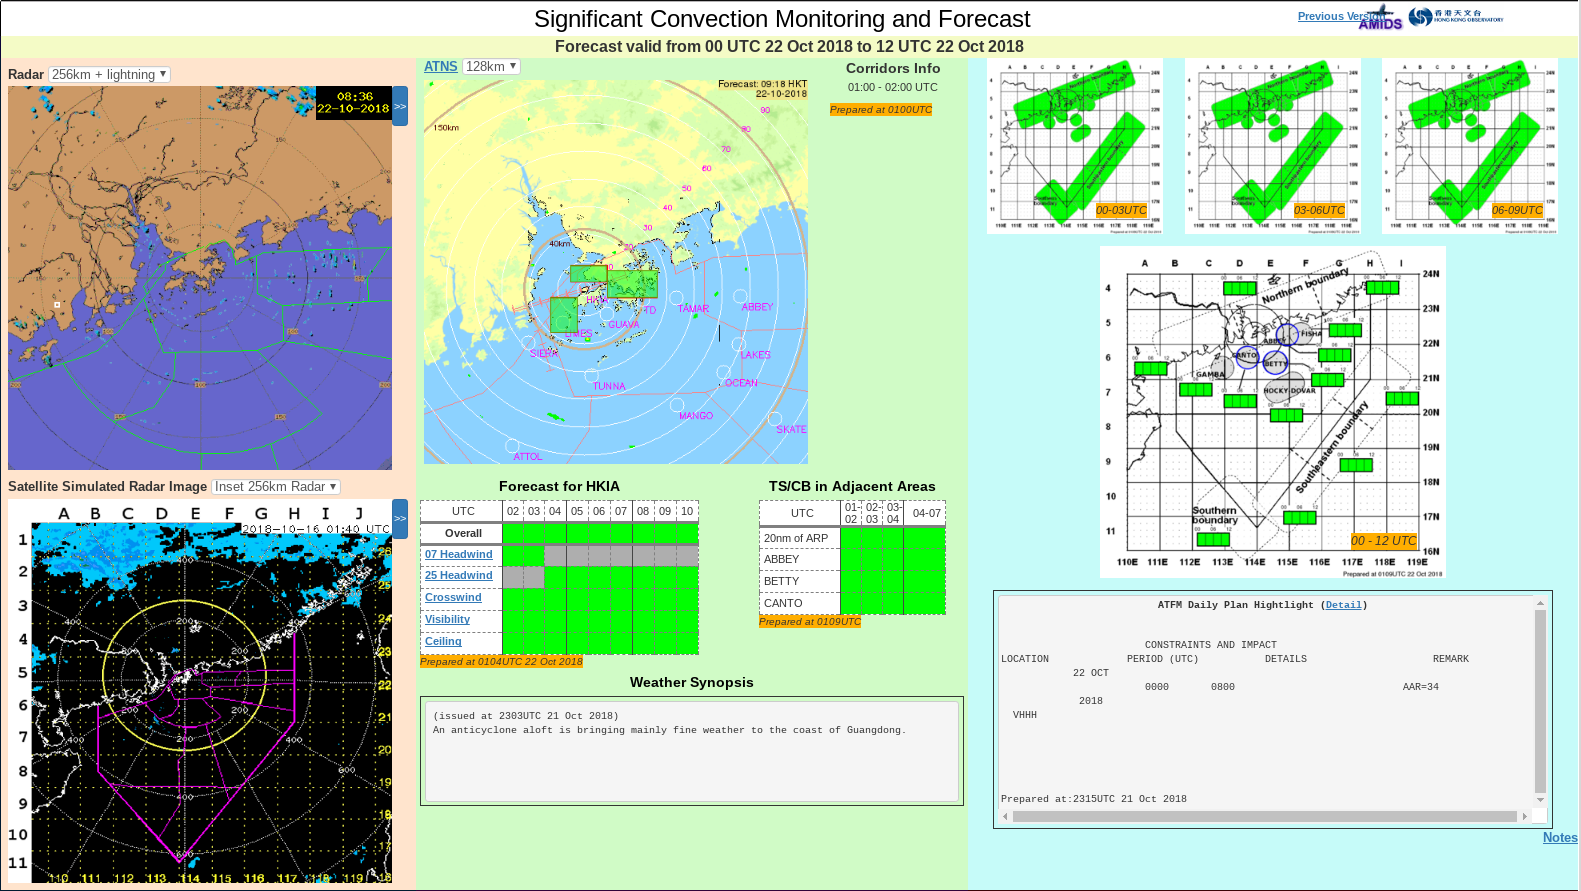 Enhanced 'Significant Convection Monitoring and Forecast' webpage